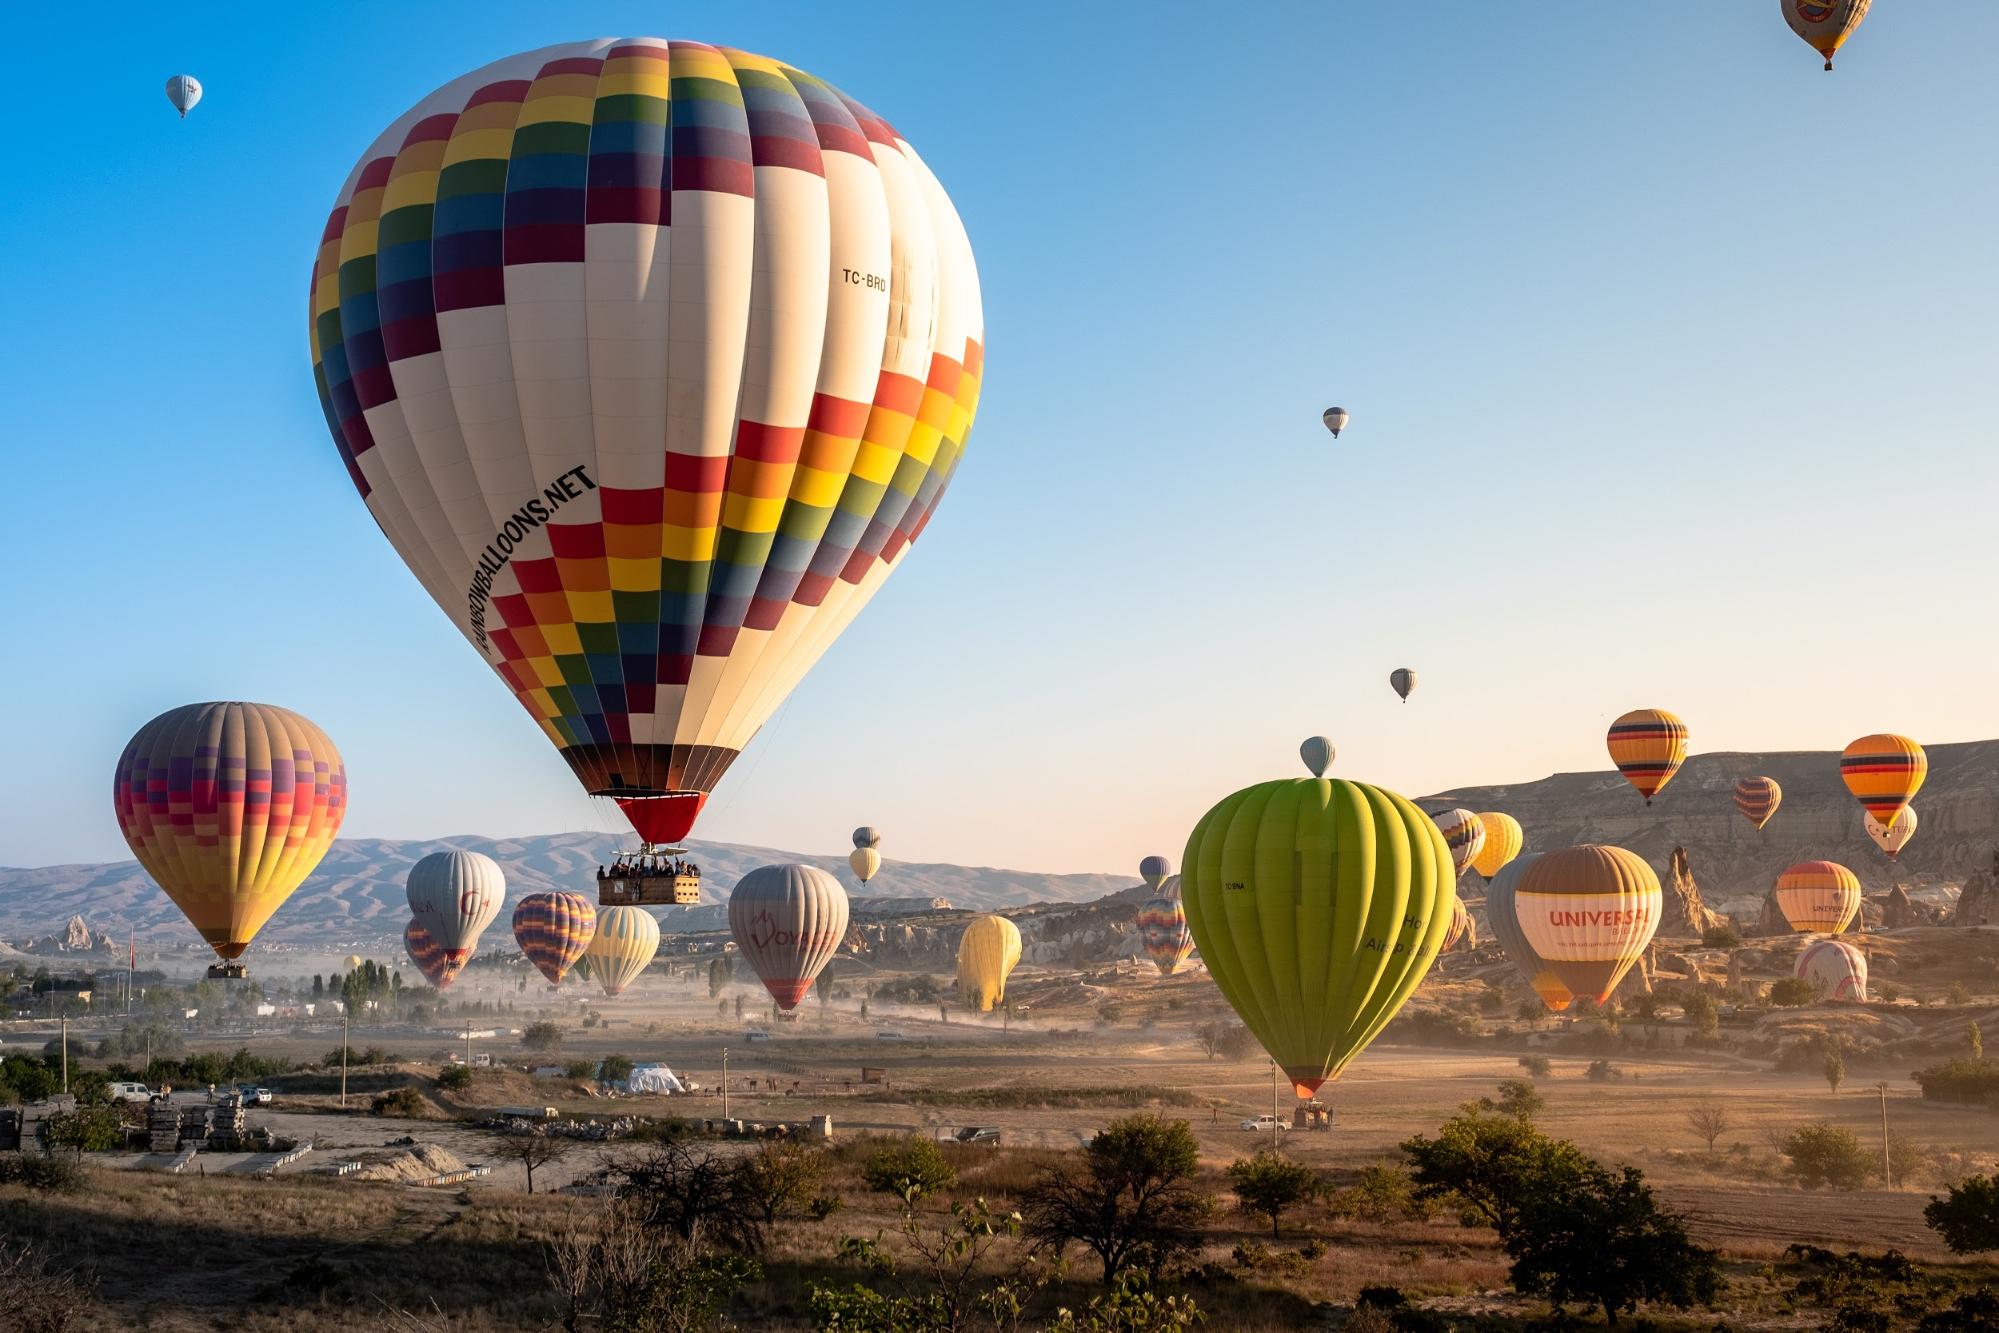 Hot air balloon experience over Teotihuacán, City of Gods, near Mexico City. Includes buffet, transportation. Witness sunrise over pyramids of Moon and Sun. 1-hour flight, brunch, and return to Mexico City. Departure from Ángel de la Independencia at 4:30 AM. Dress warmly.